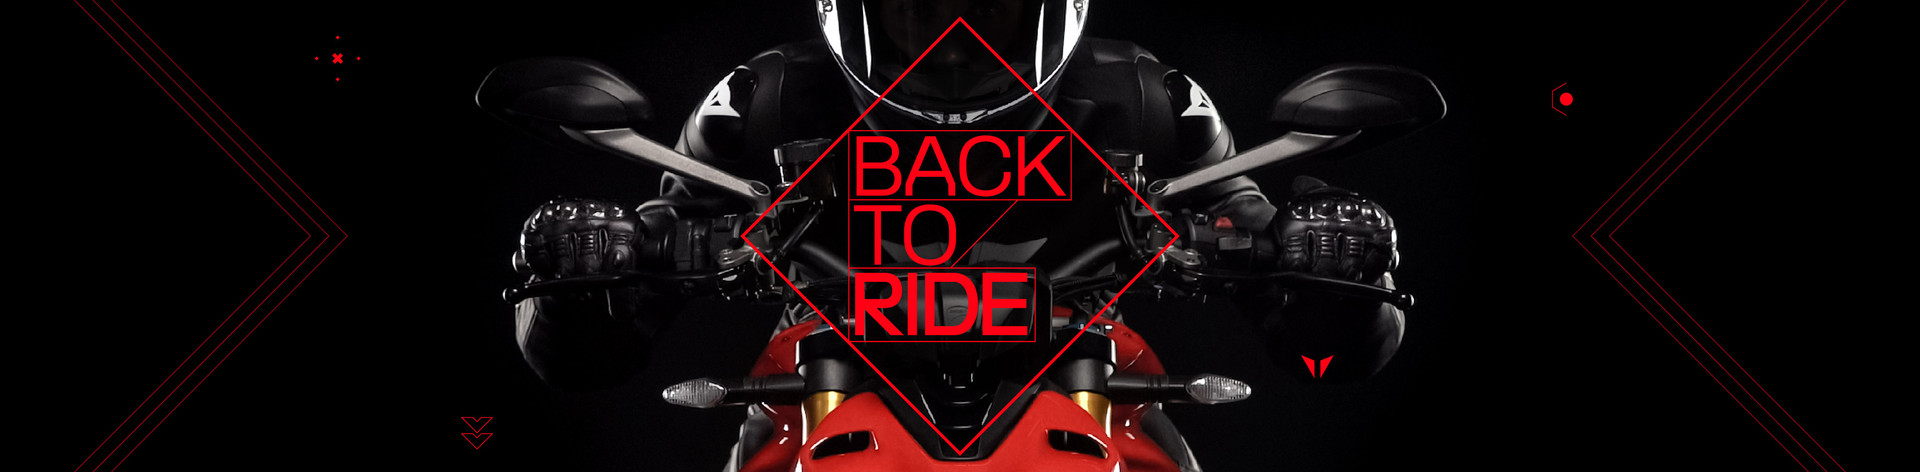 Dainese Back to ride